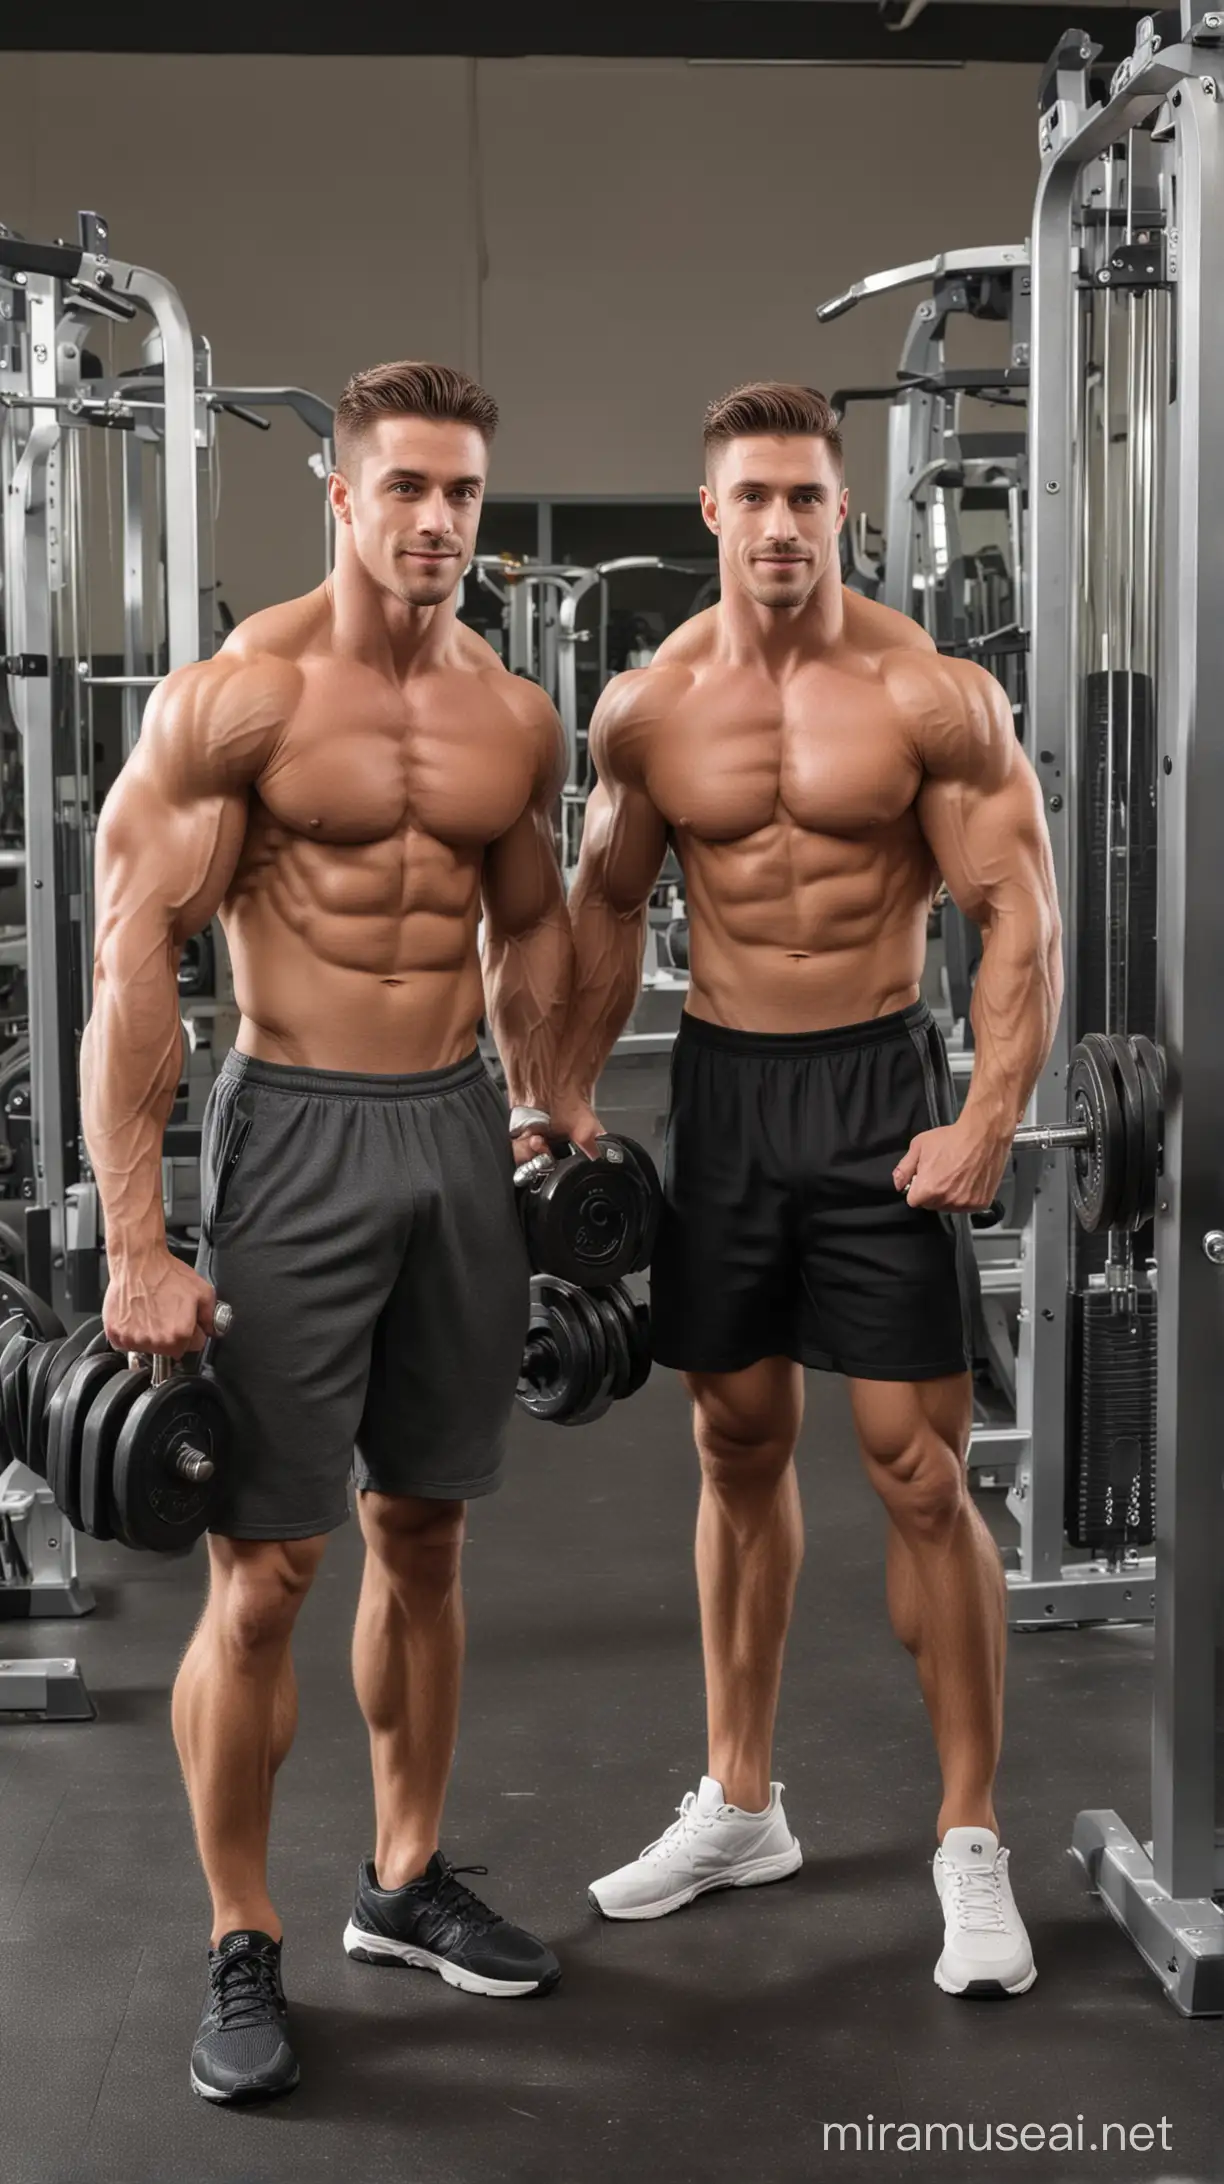 Muscular Bodybuilders Duo Training Together at the Gym